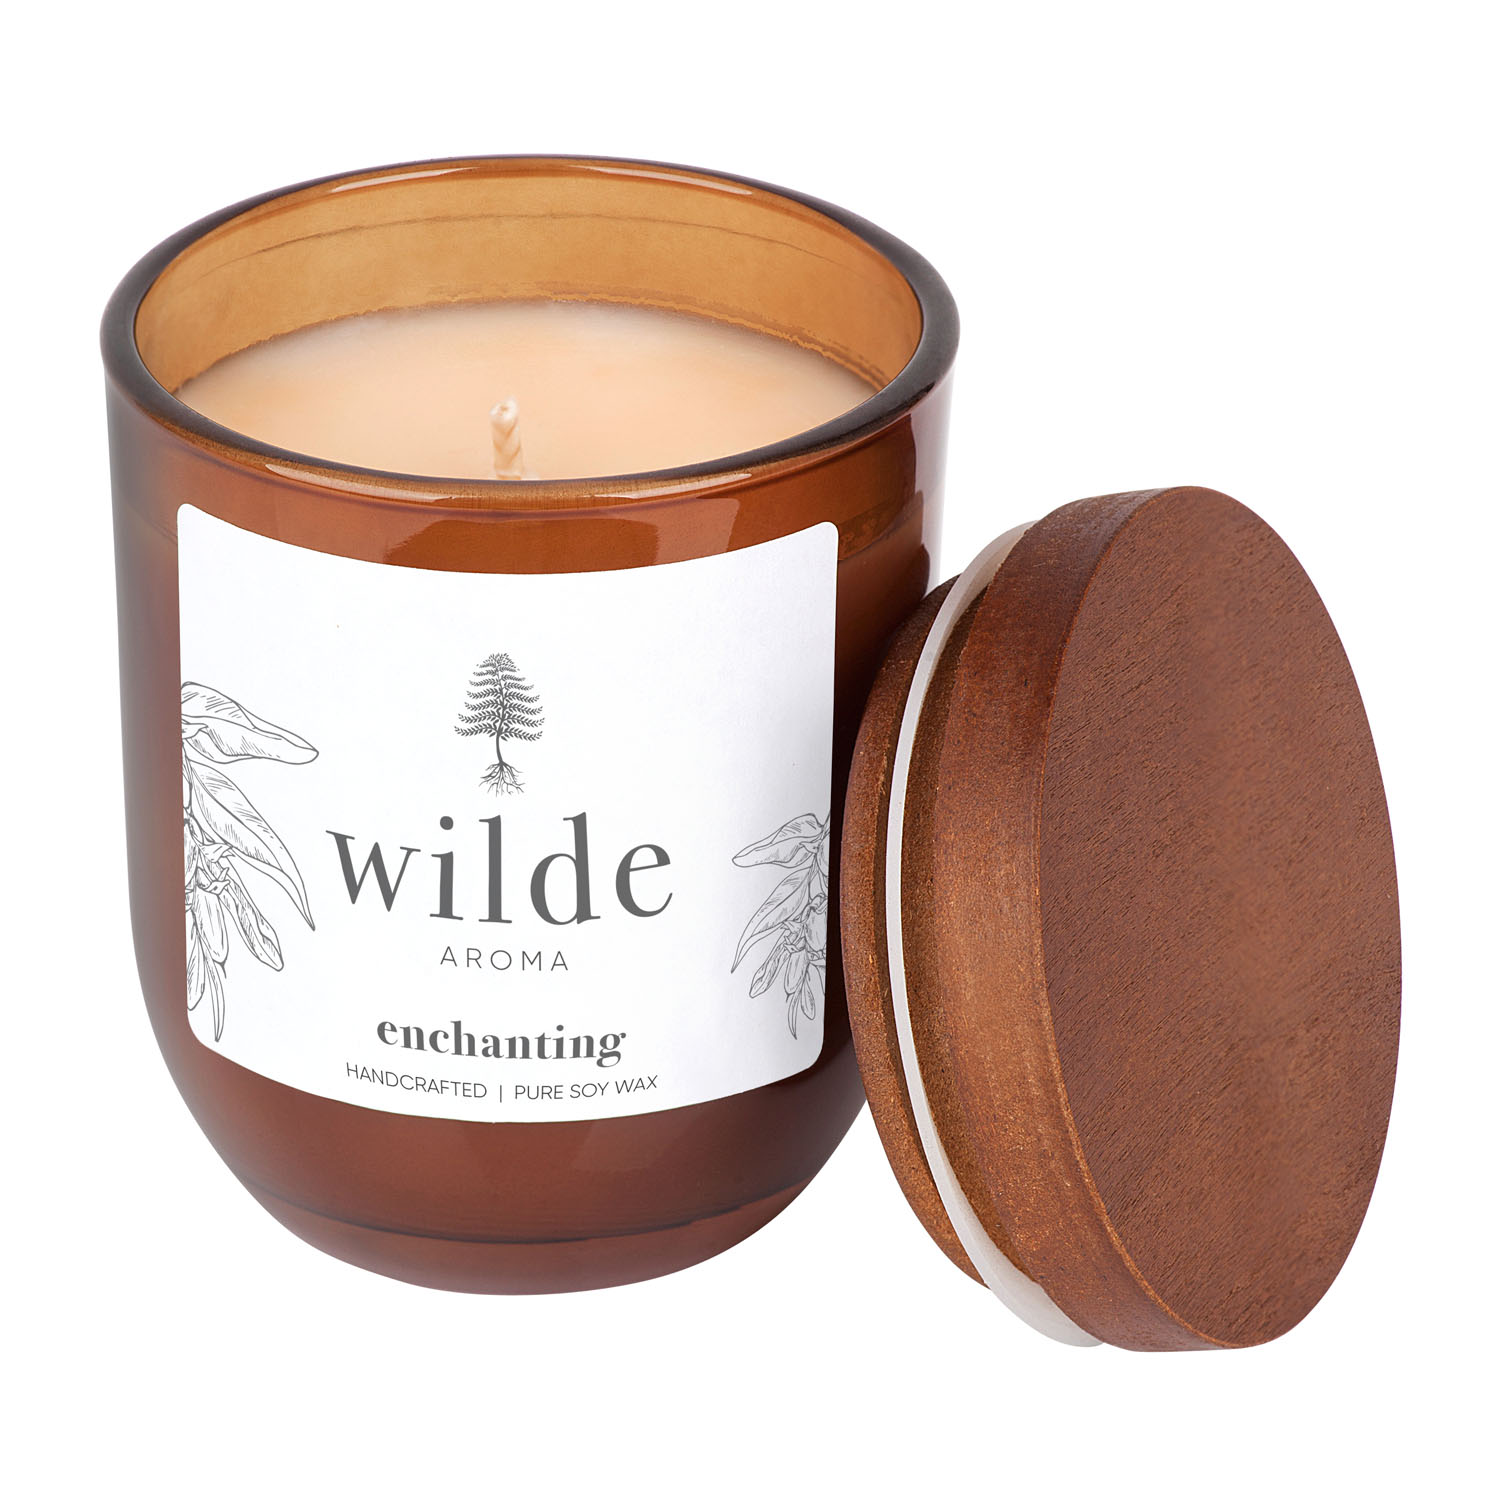 Enchanting candle - Wilde Aroma